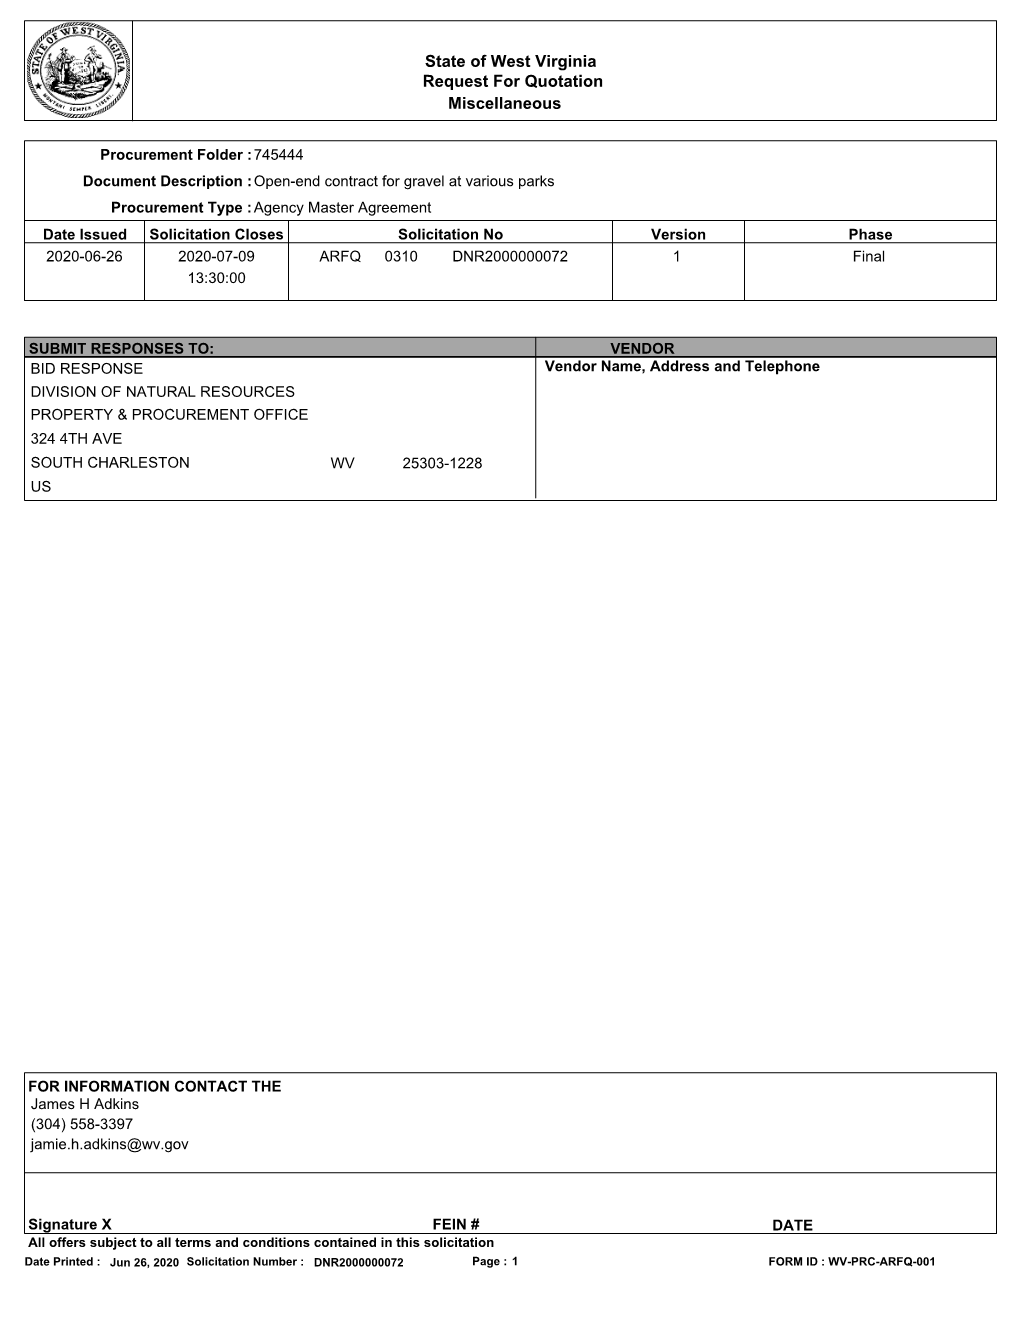 State of West Virginia Request for Quotation Miscellaneous